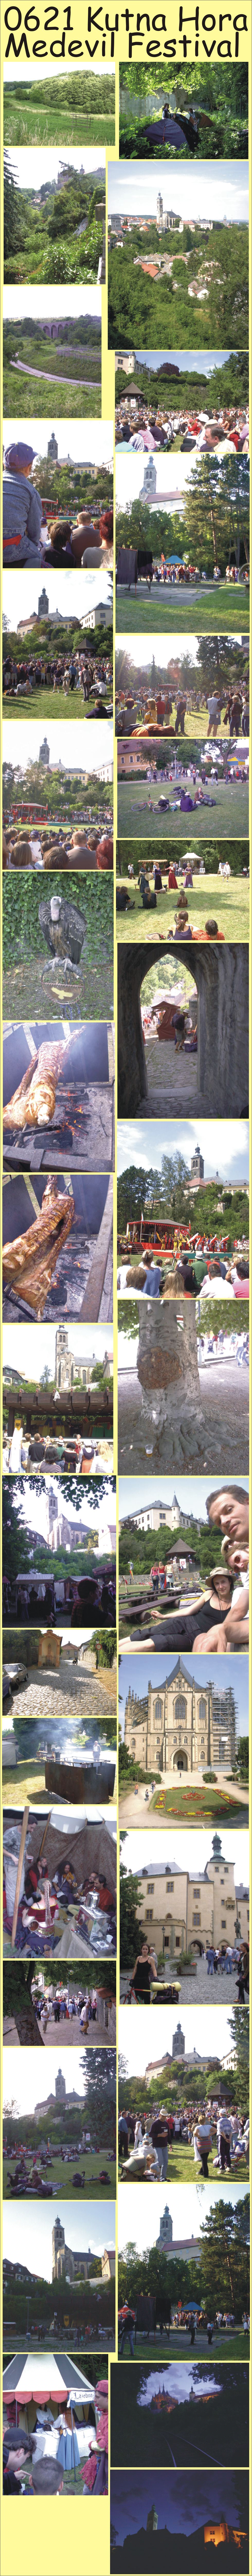 Kutna Hora Medieval Festival, camping in the Czech Republic